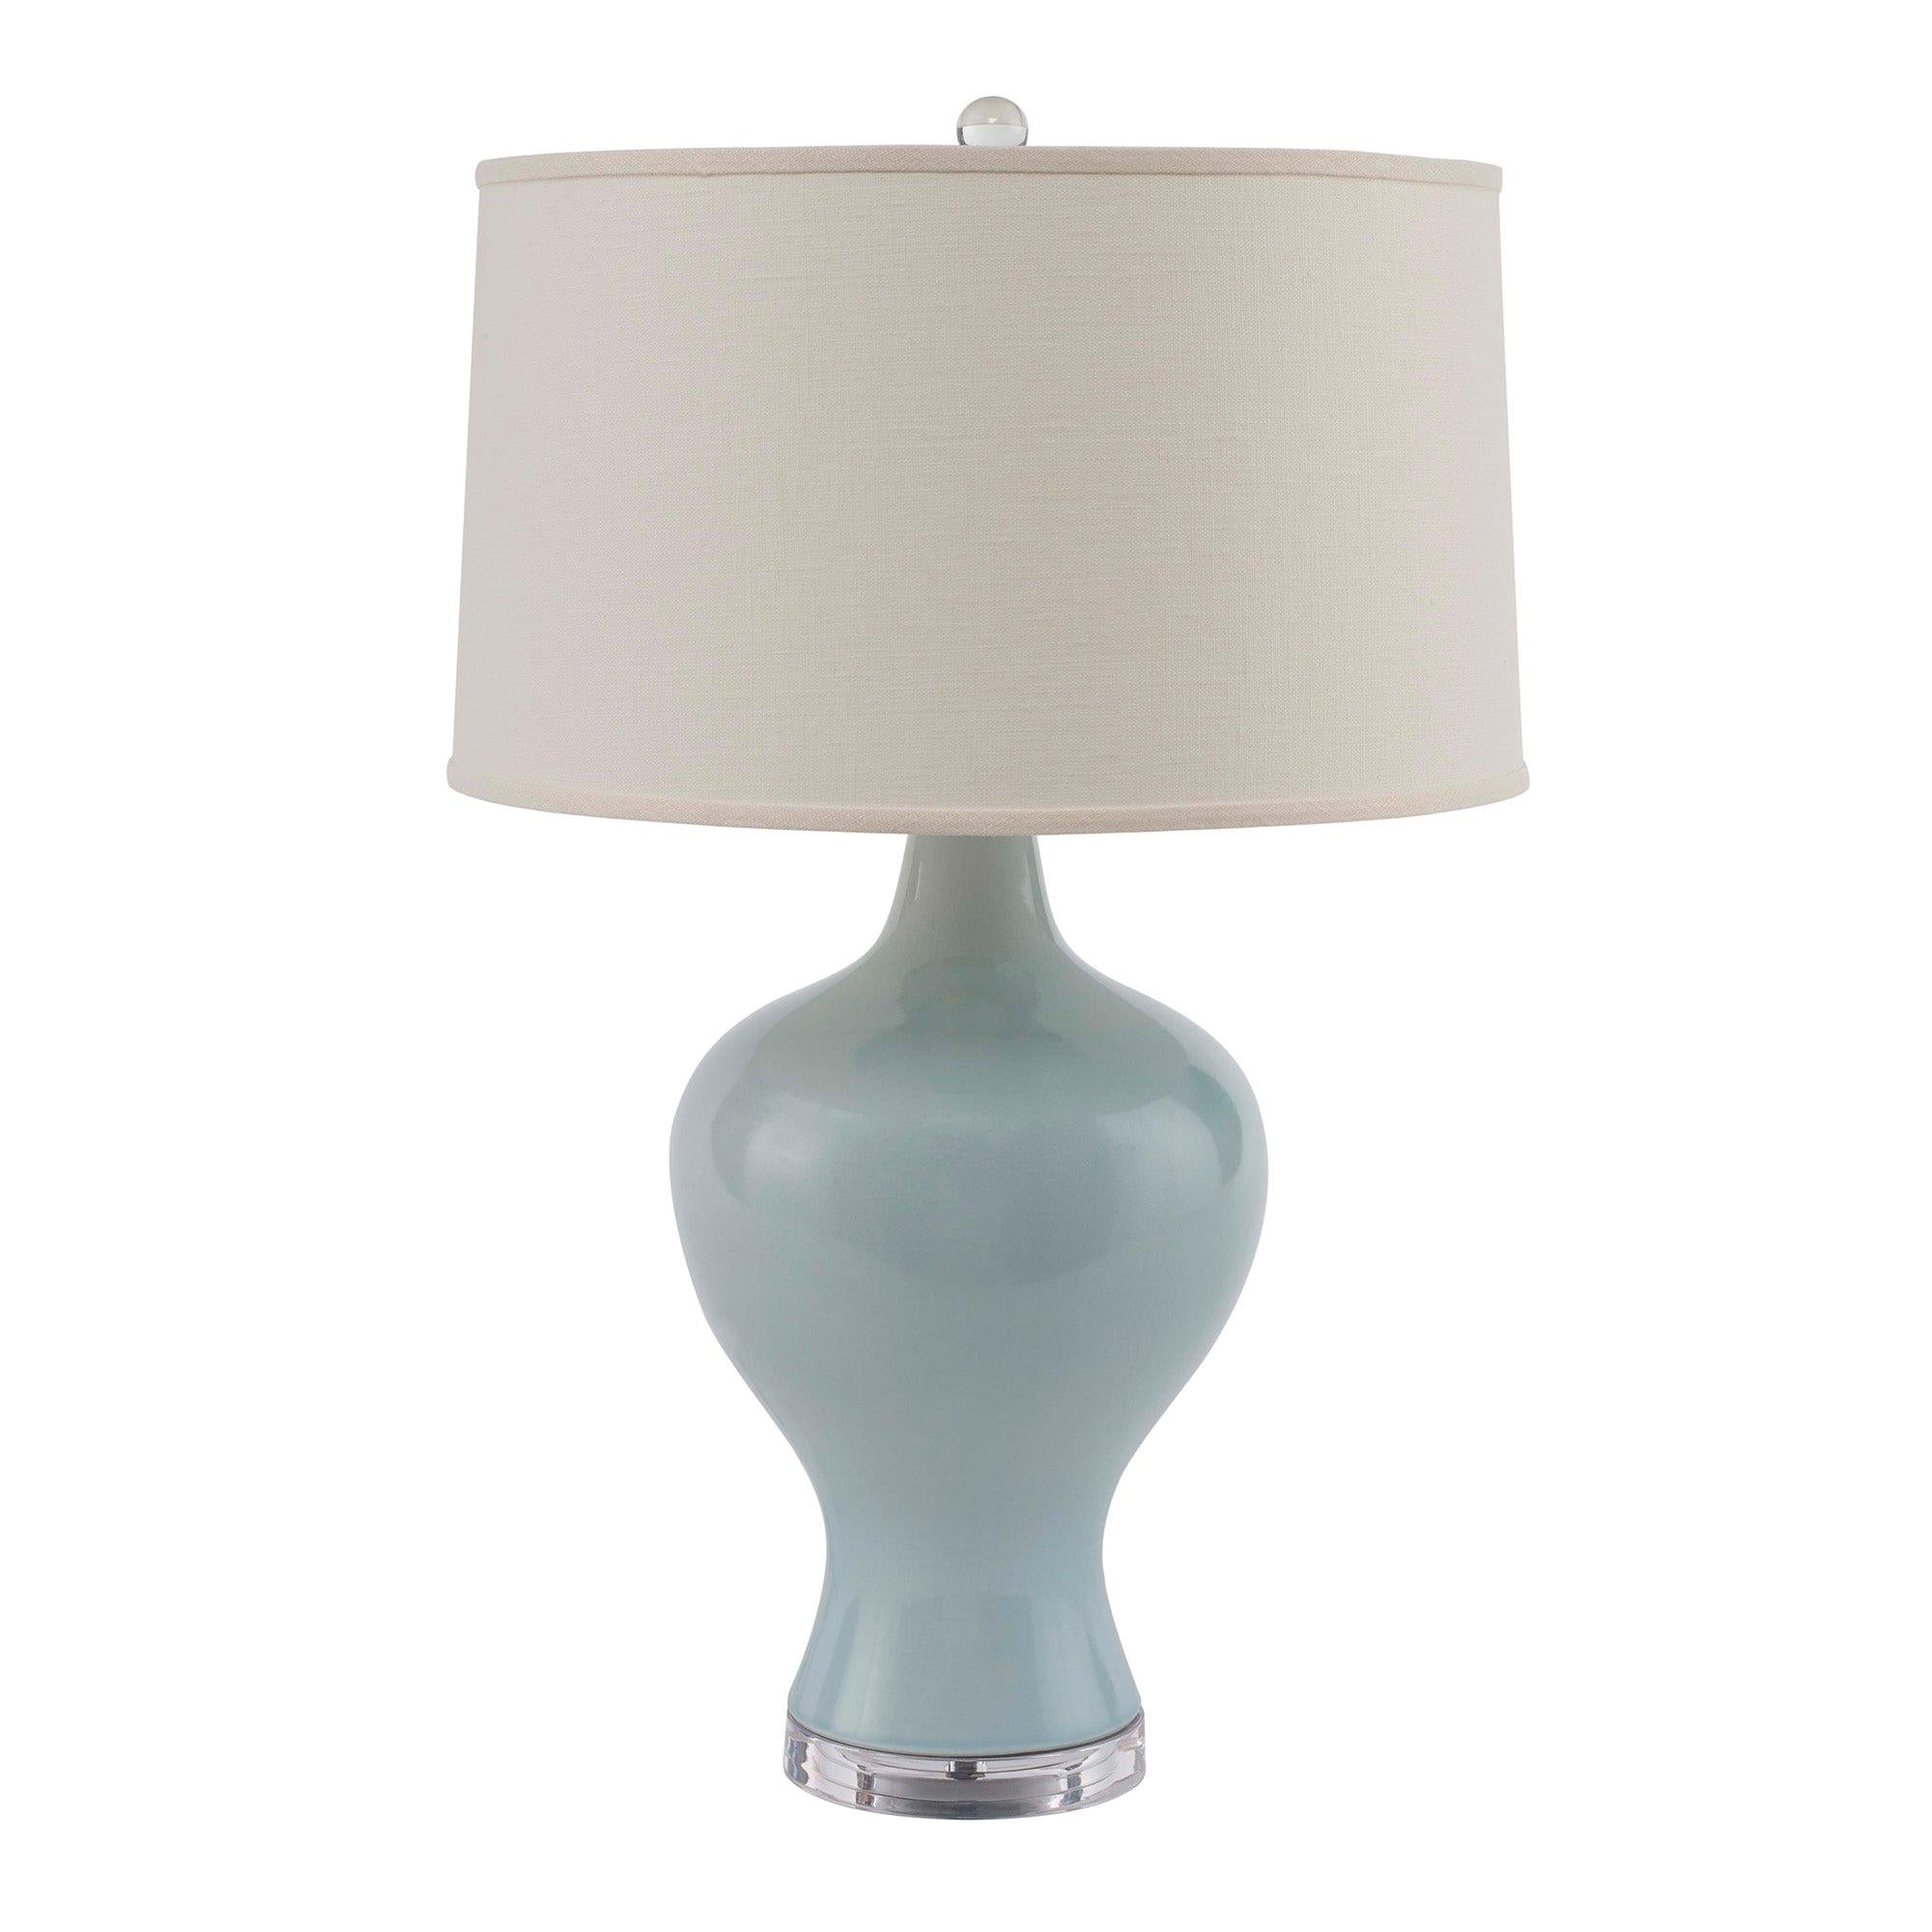 Giselle Table Lamp in Spa Blue Ceramic by CuratedKravet